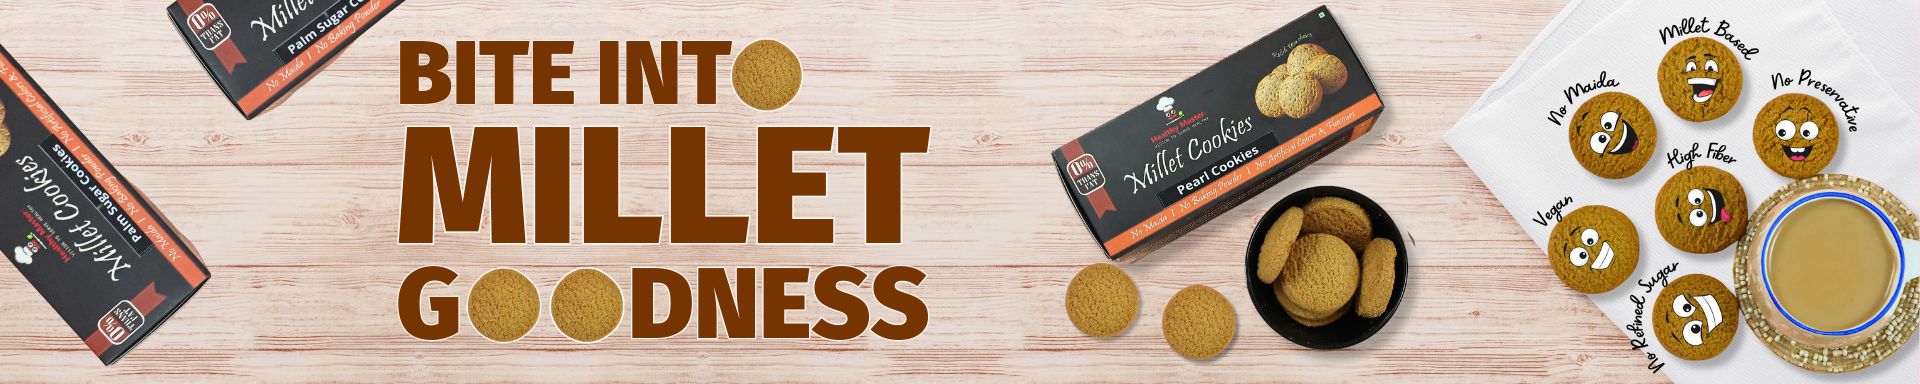  Buy Millets Cookies Online at Best Price (Up to 10% Off) in India - Healthy Master